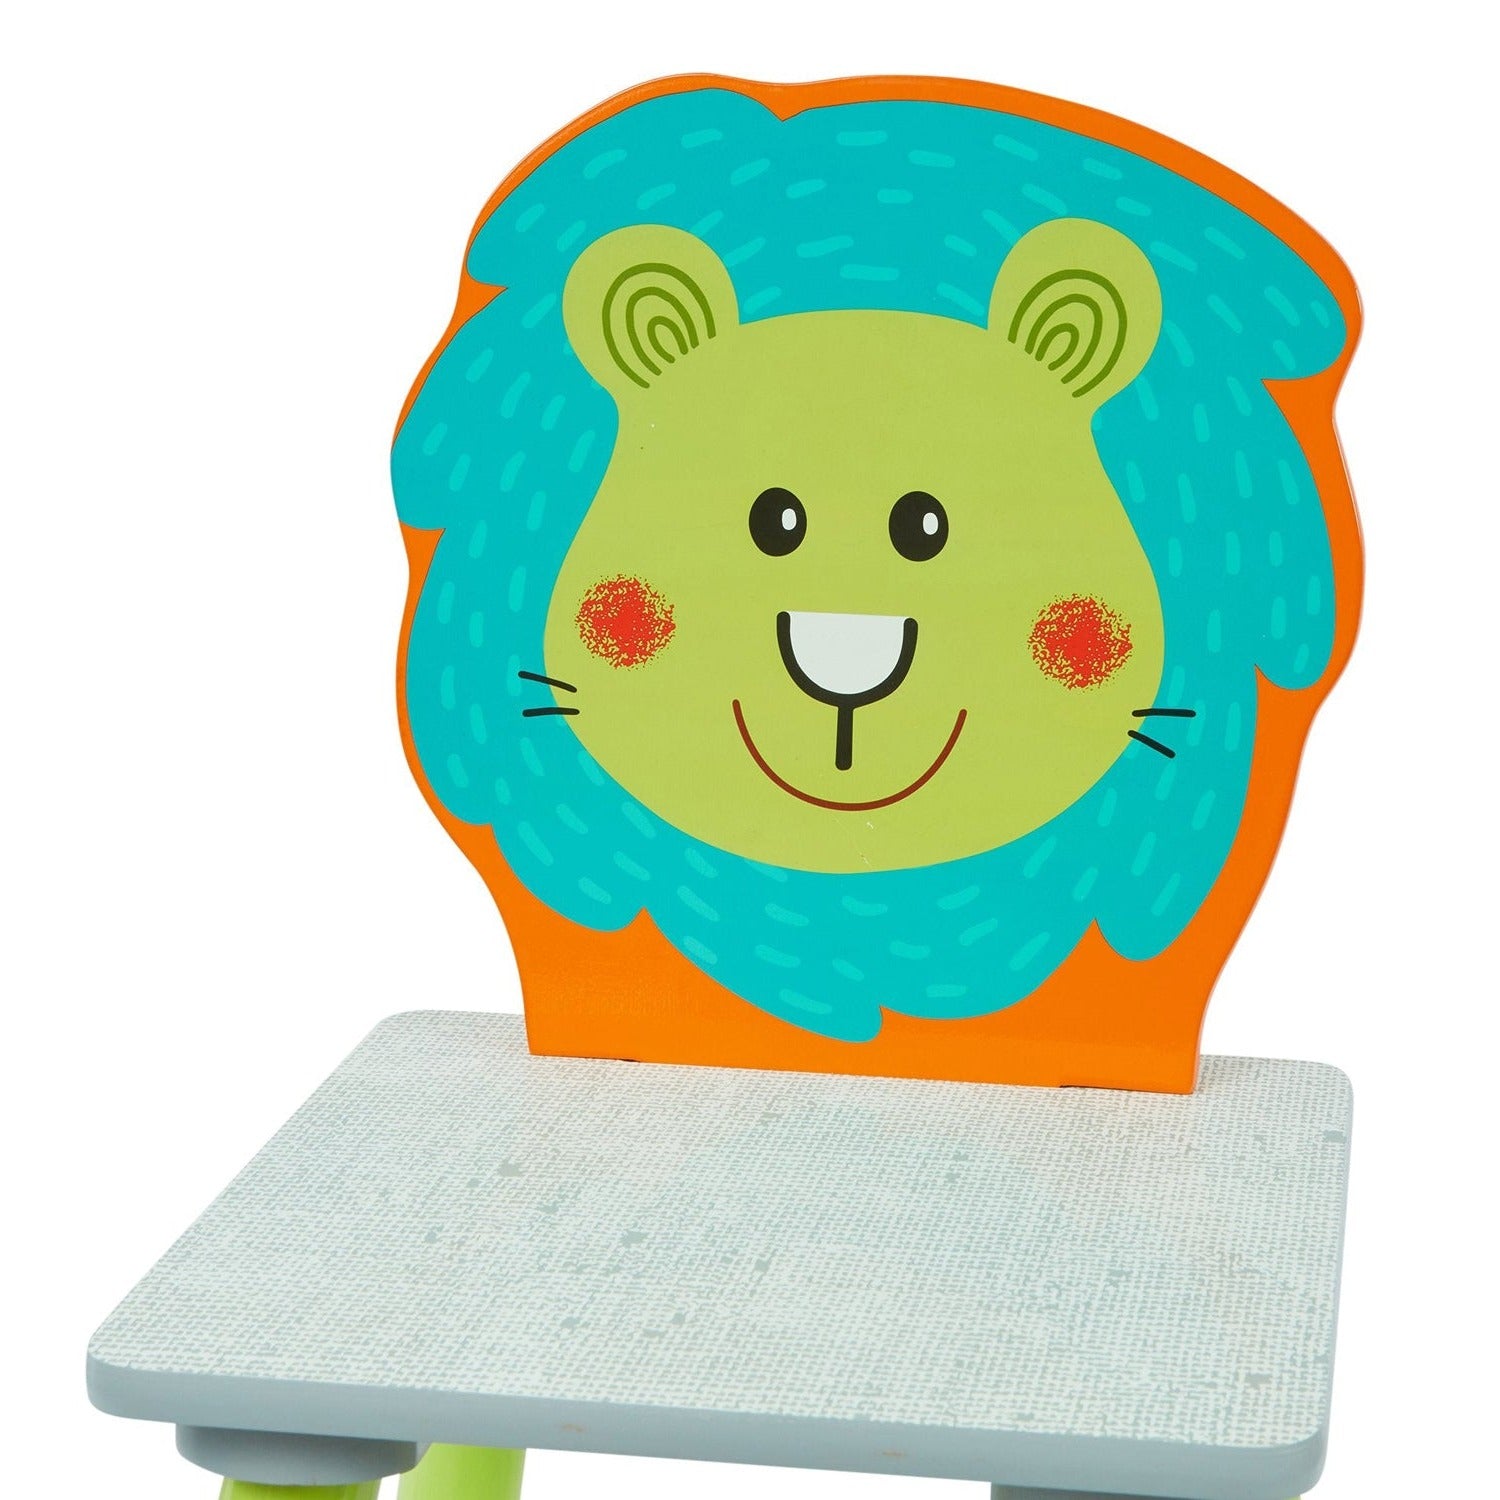 Lion and Zebra Table and Chairs by Liberty House Toys